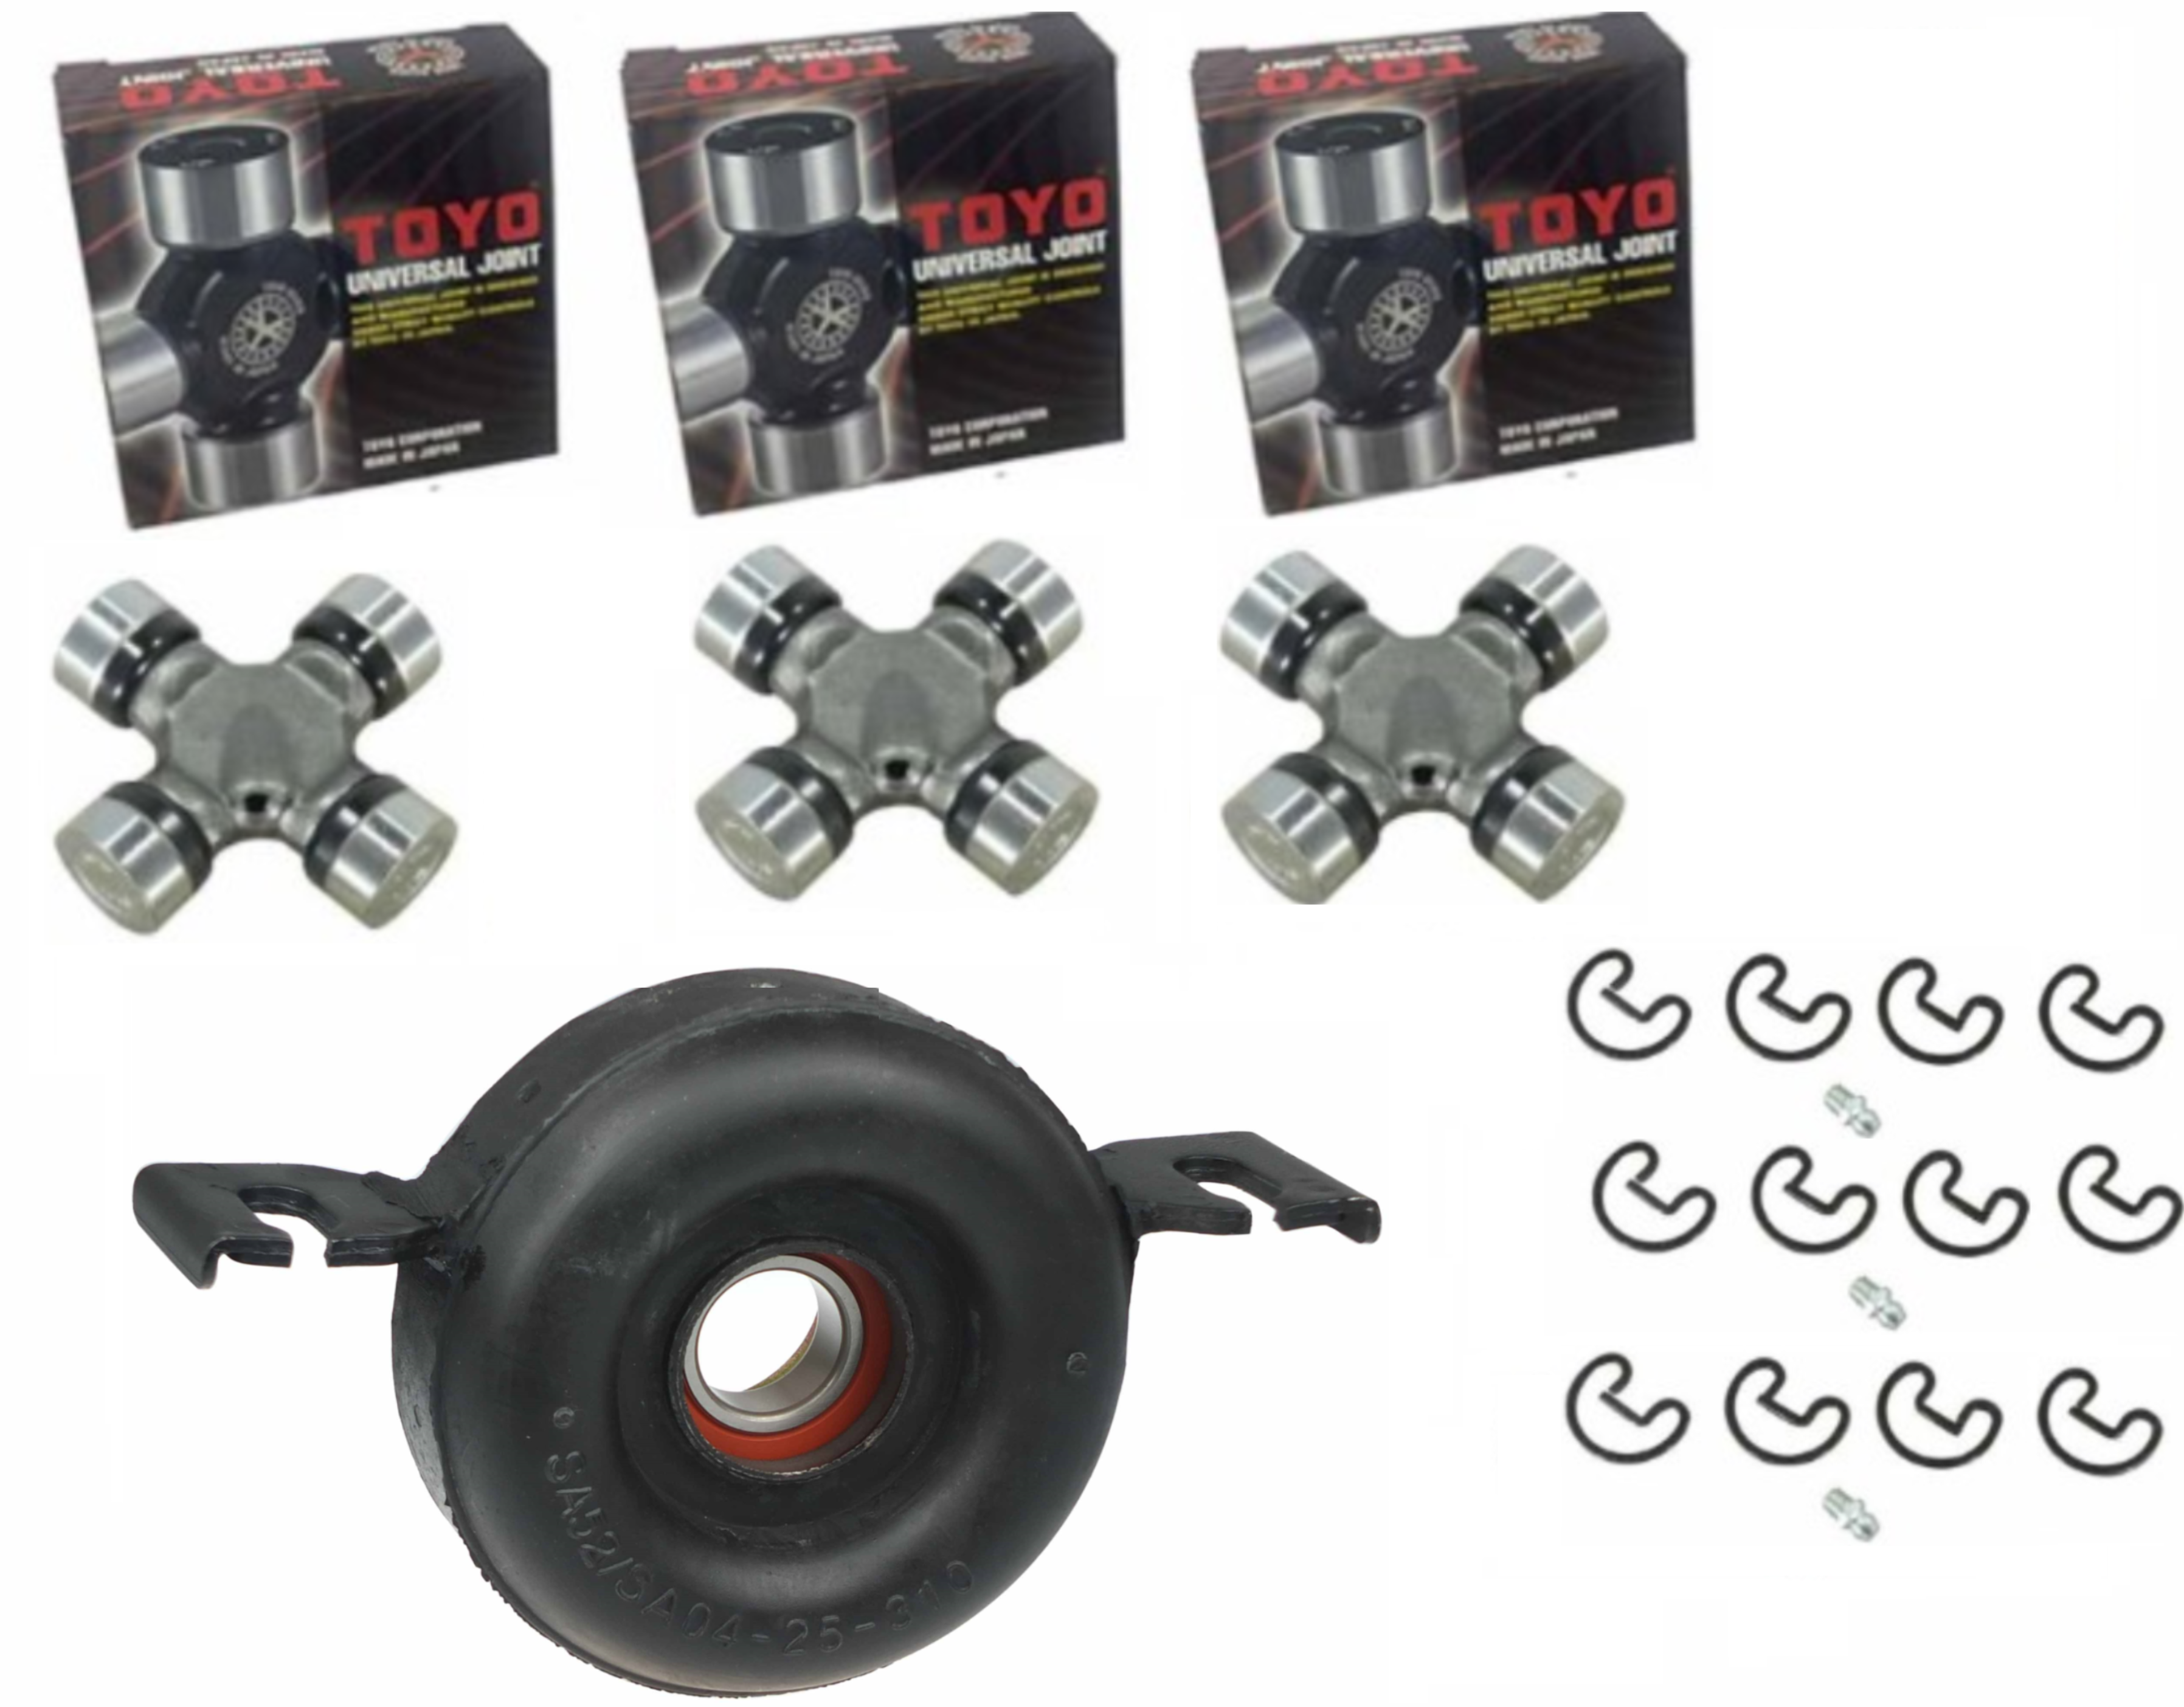 Centre Bearing+Universal Joints for Mazda Bravo B2500 B2600 UN 4WD 2/1999 on